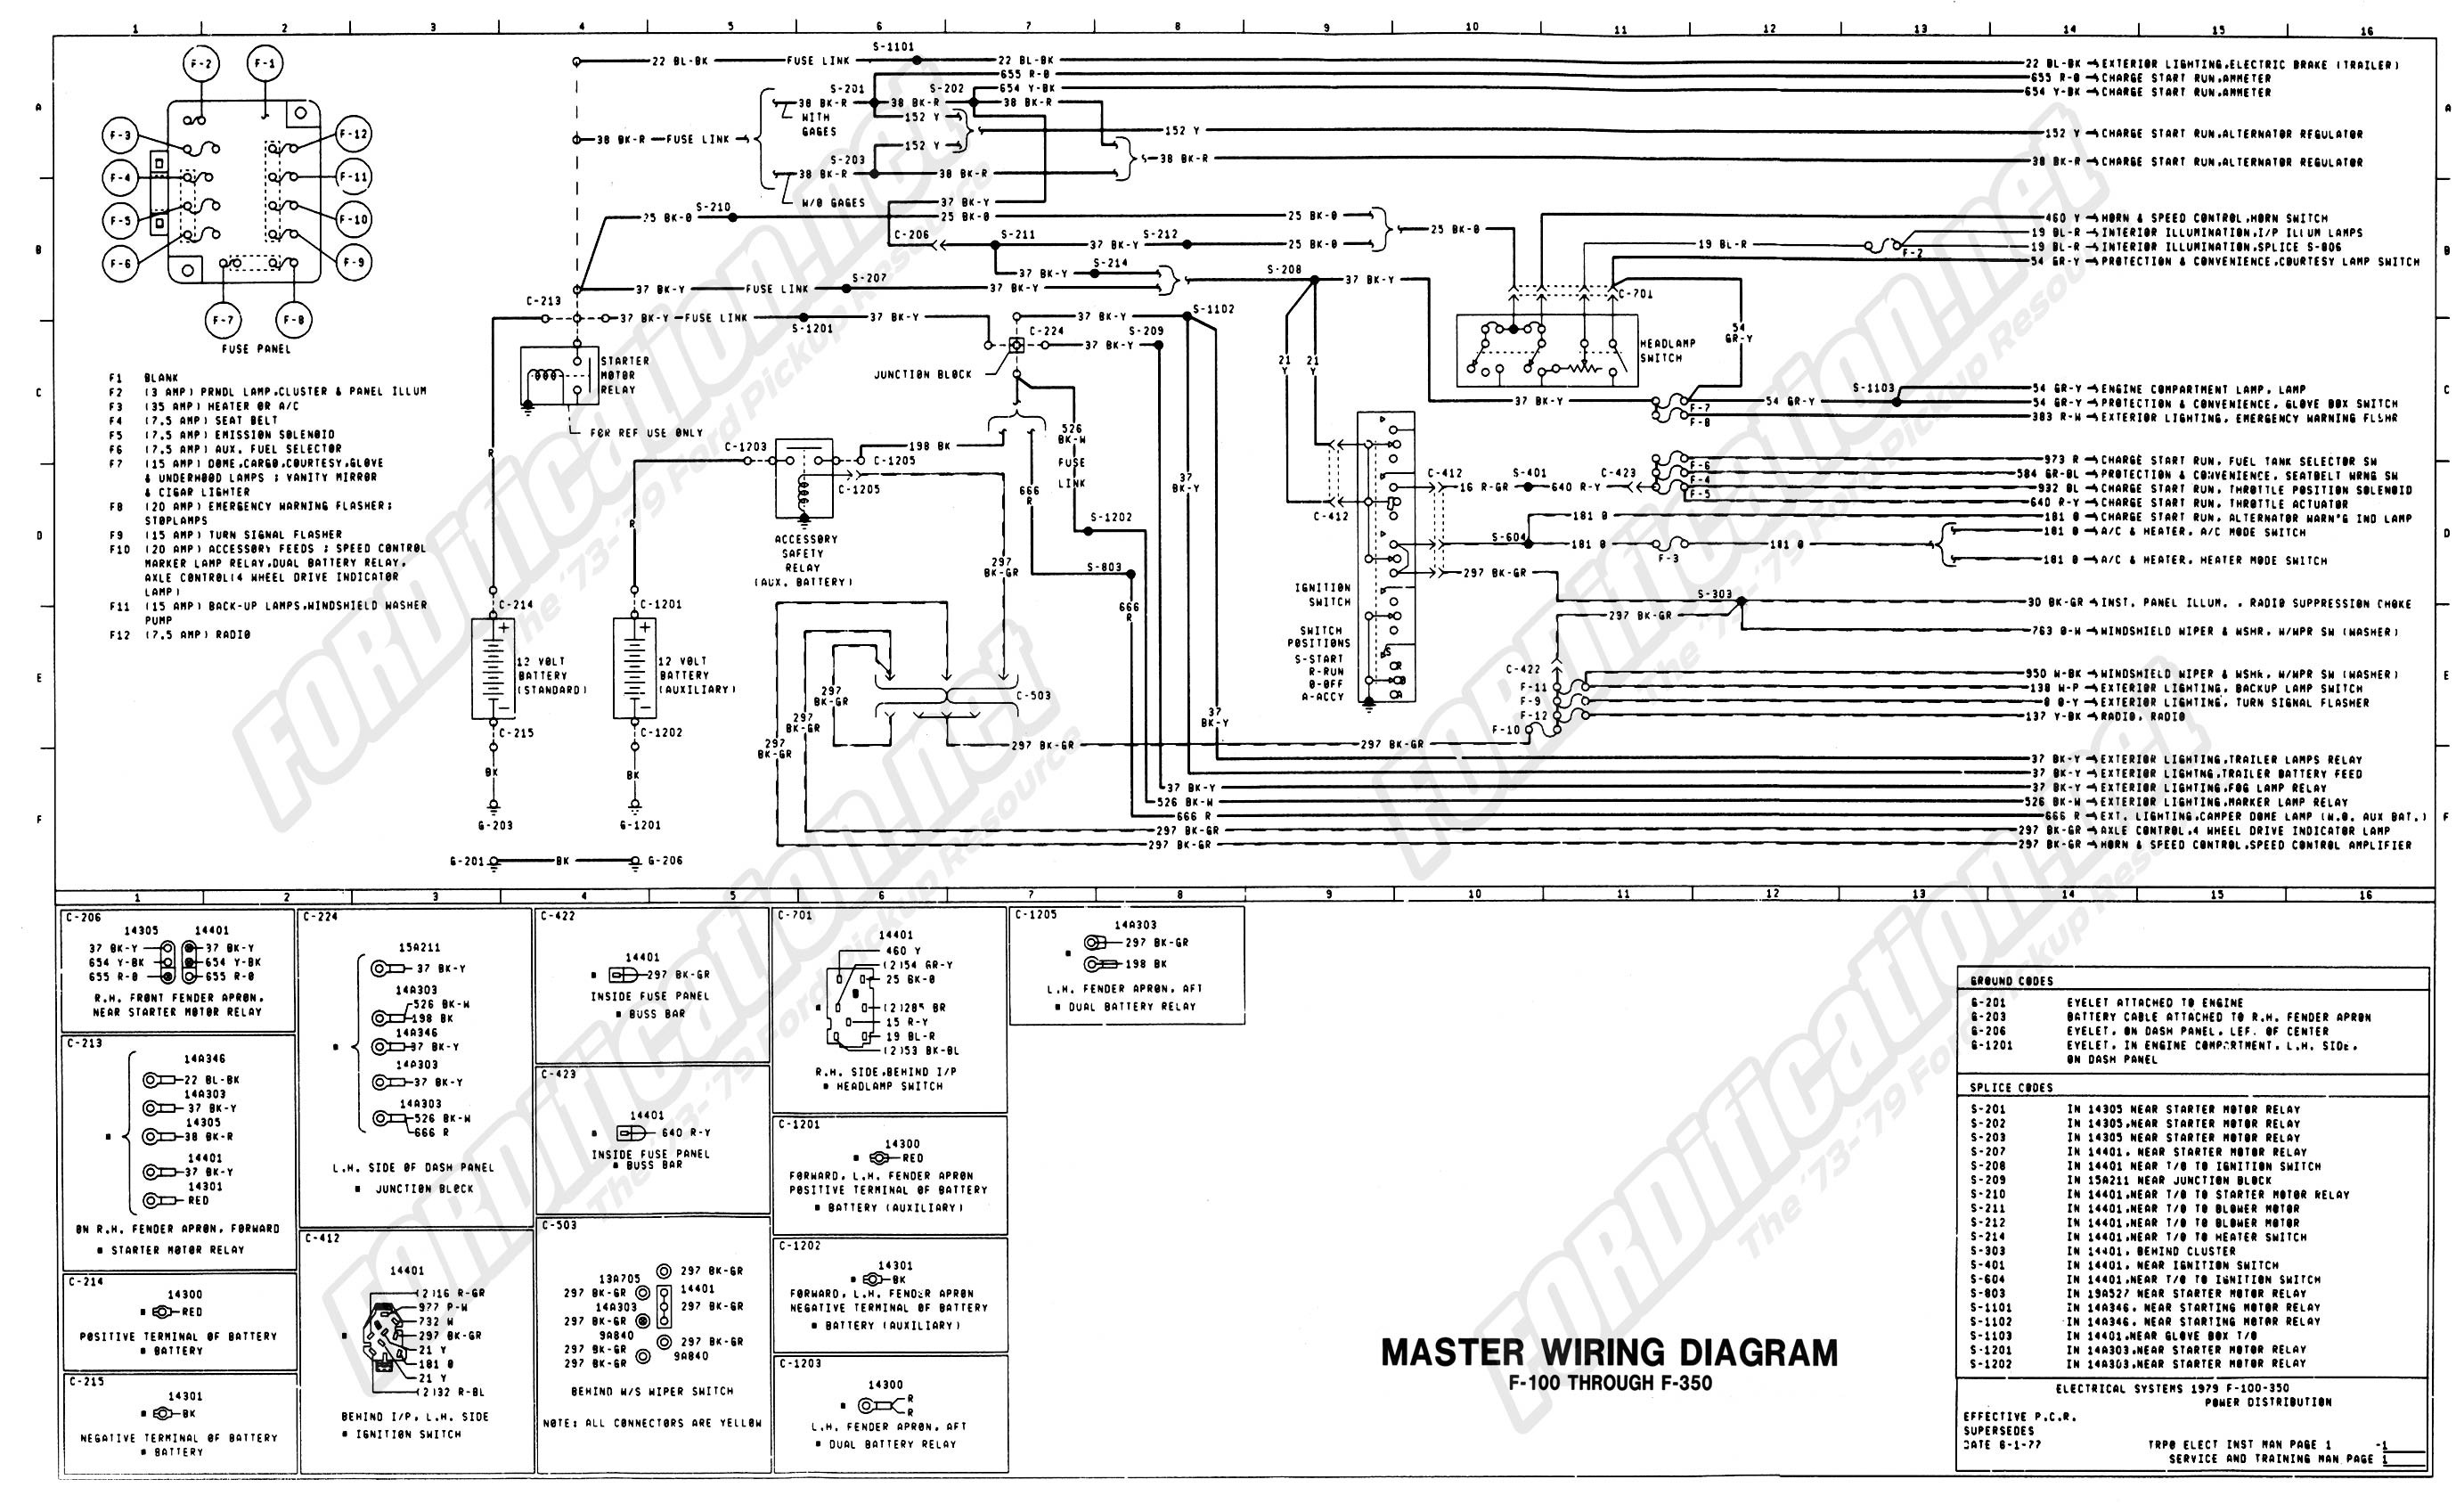 Ford Four Wire Starter Solenoid Wiring Diagram from mainetreasurechest.com